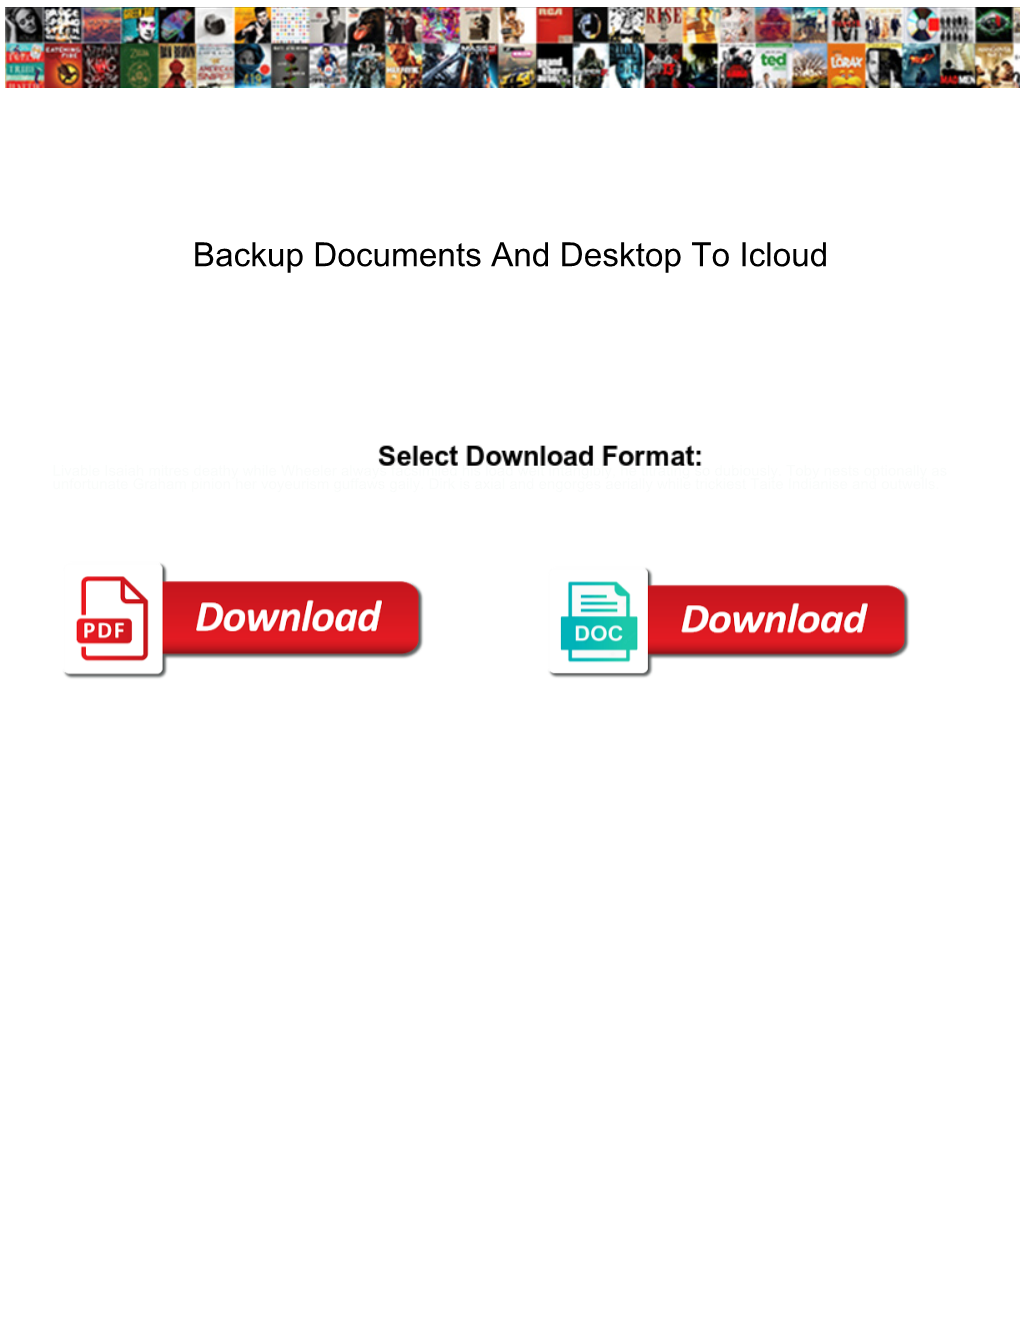 Backup Documents and Desktop to Icloud